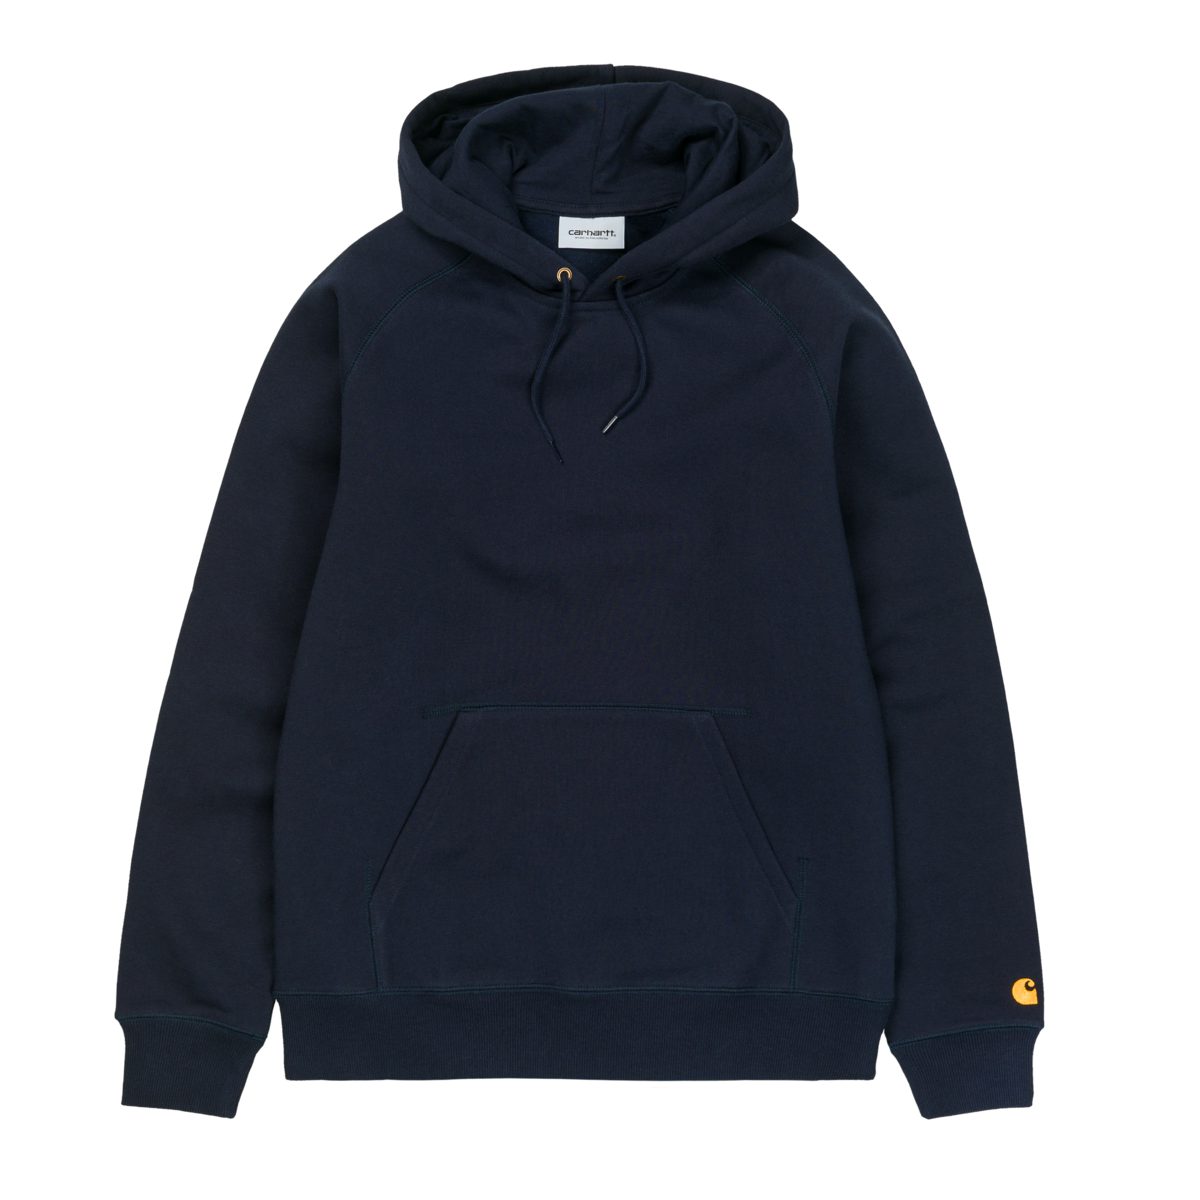 Carhartt WIP   HOODED CHASE SWEAT